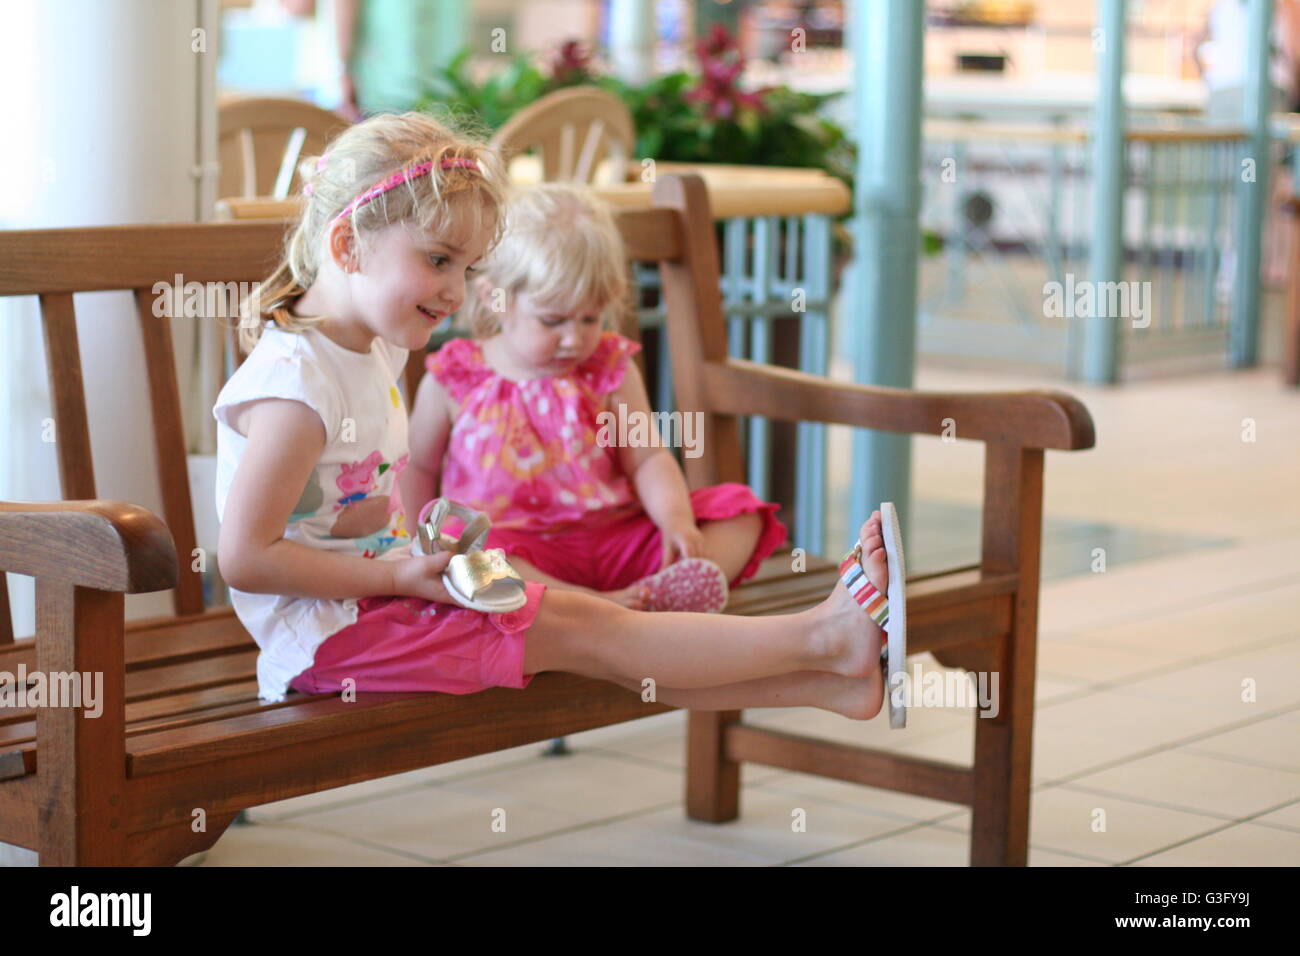 Little girls, children kids  sitting on a bench having fun playing together Stock Photo